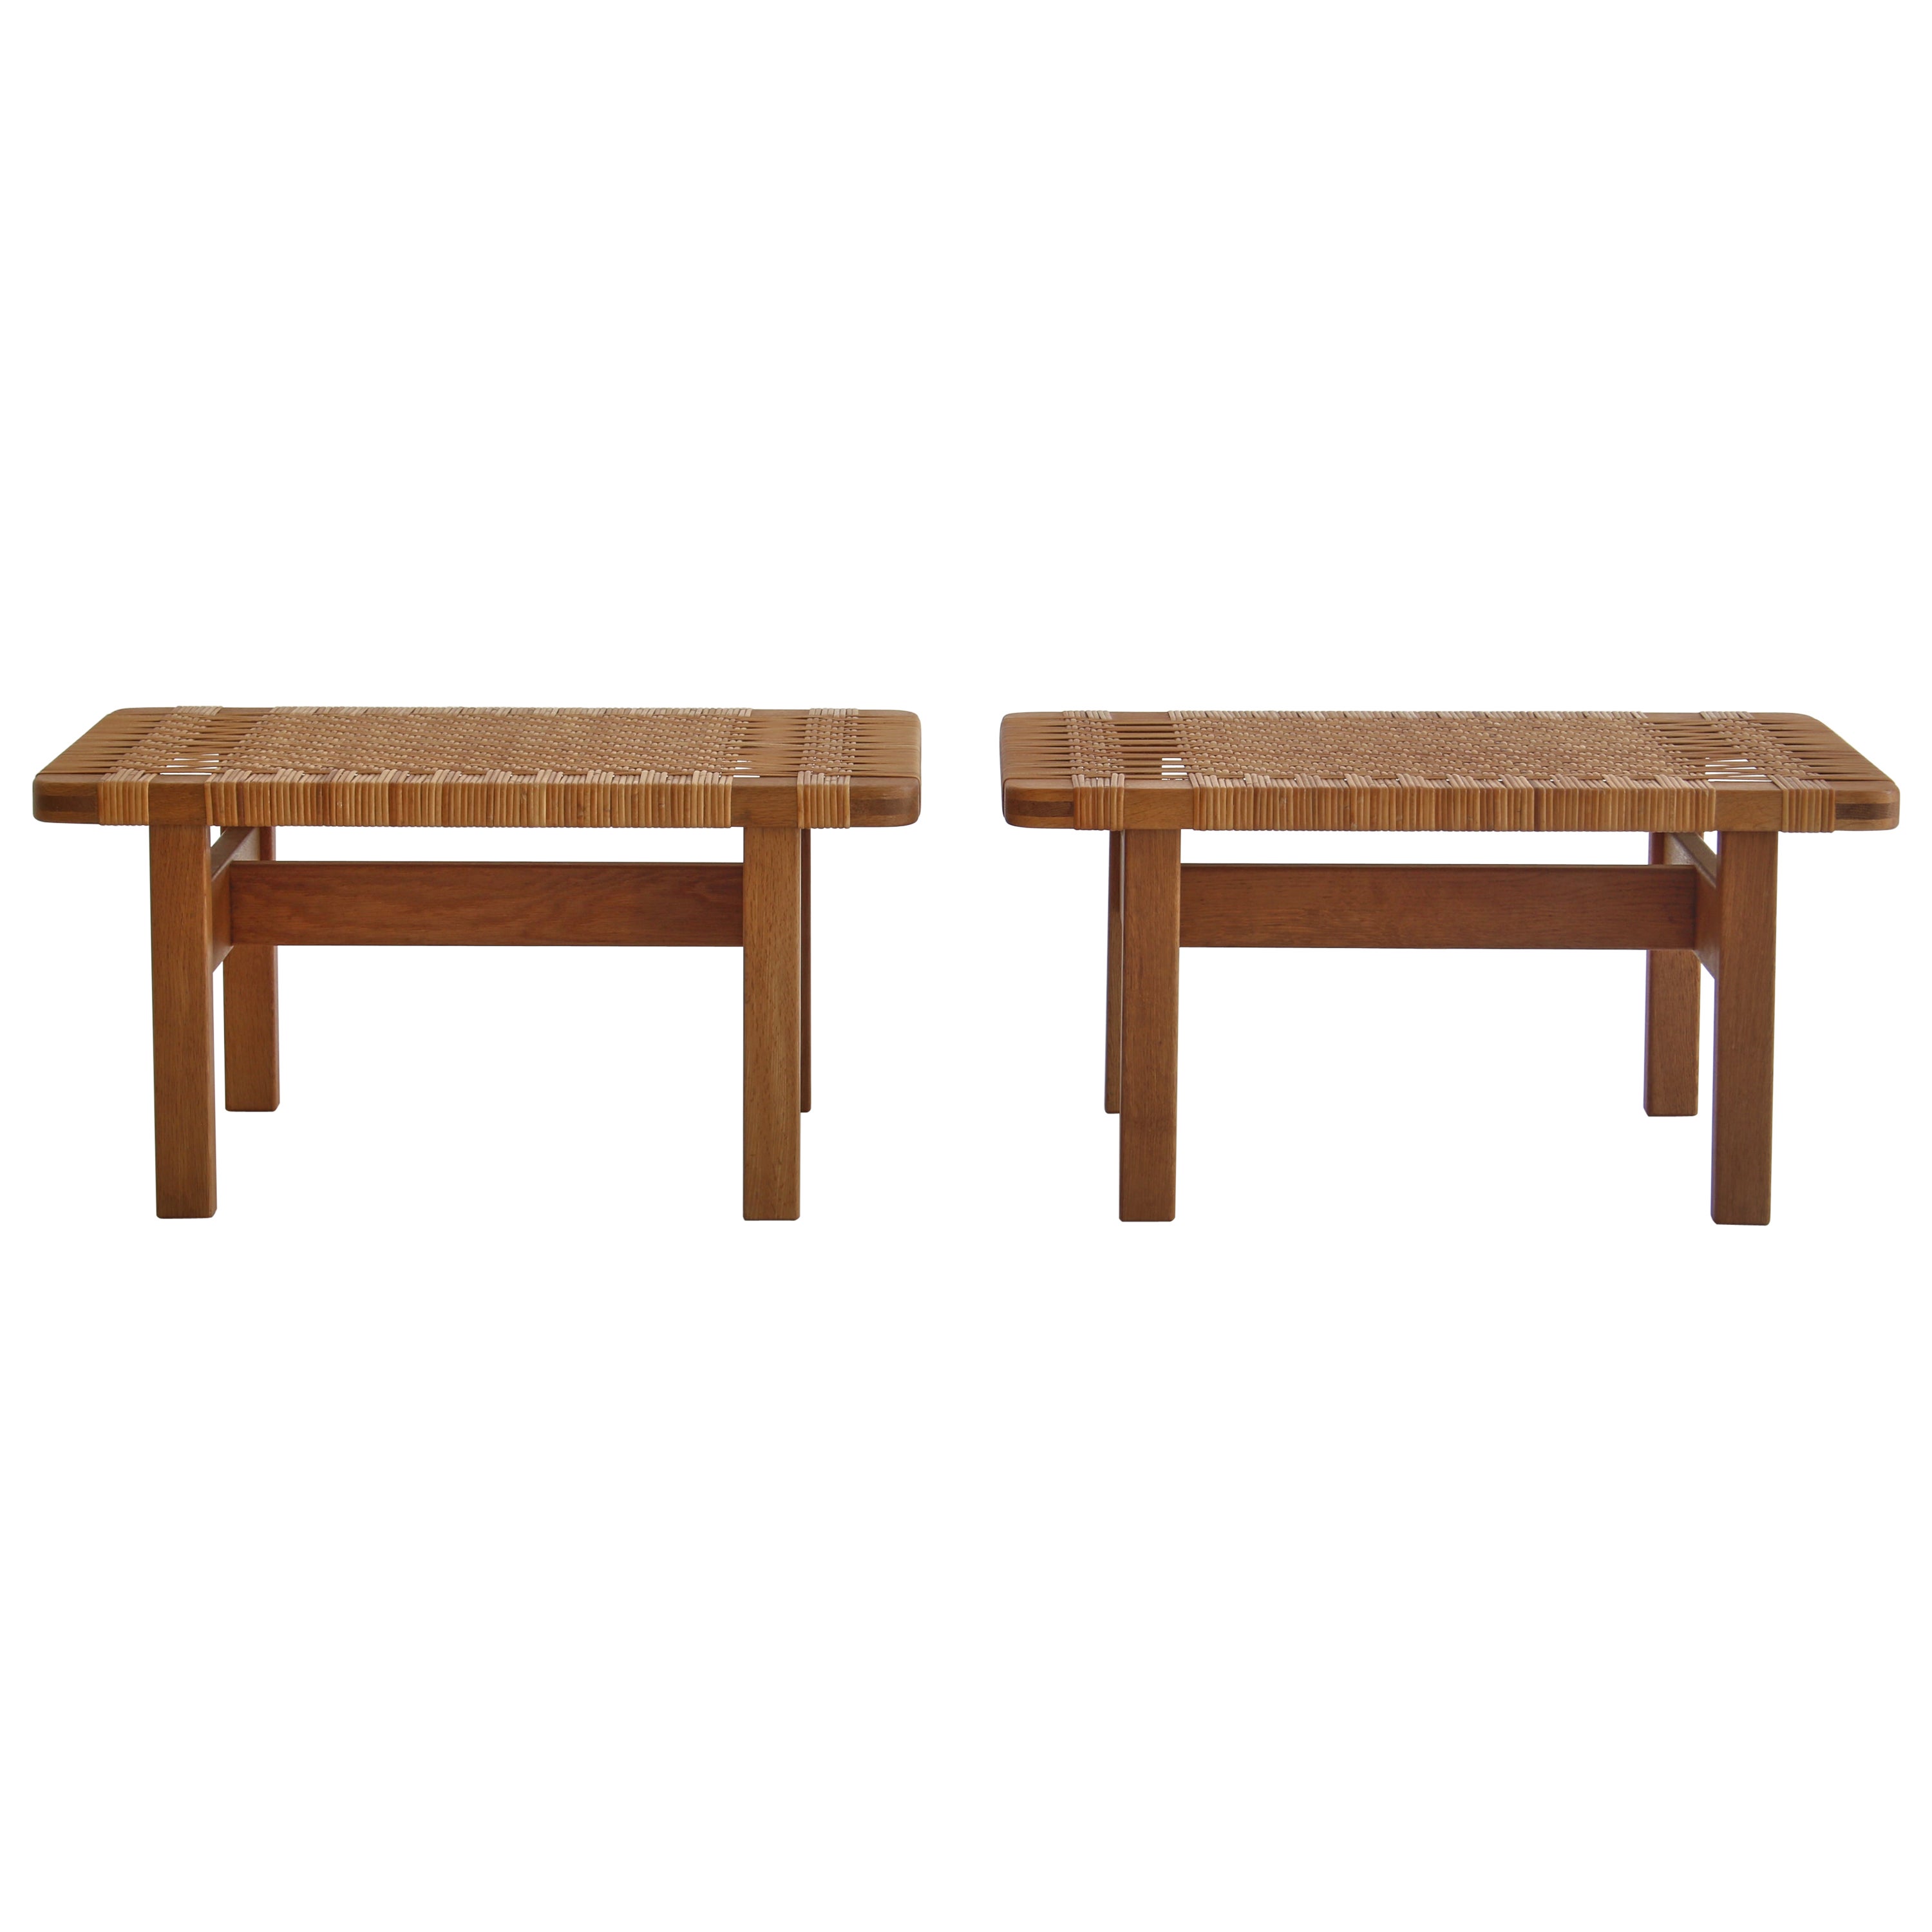 Borge Mogensen Set of Side Tables/Benches in Oak and Rattan Cane, 1950s, Denmark